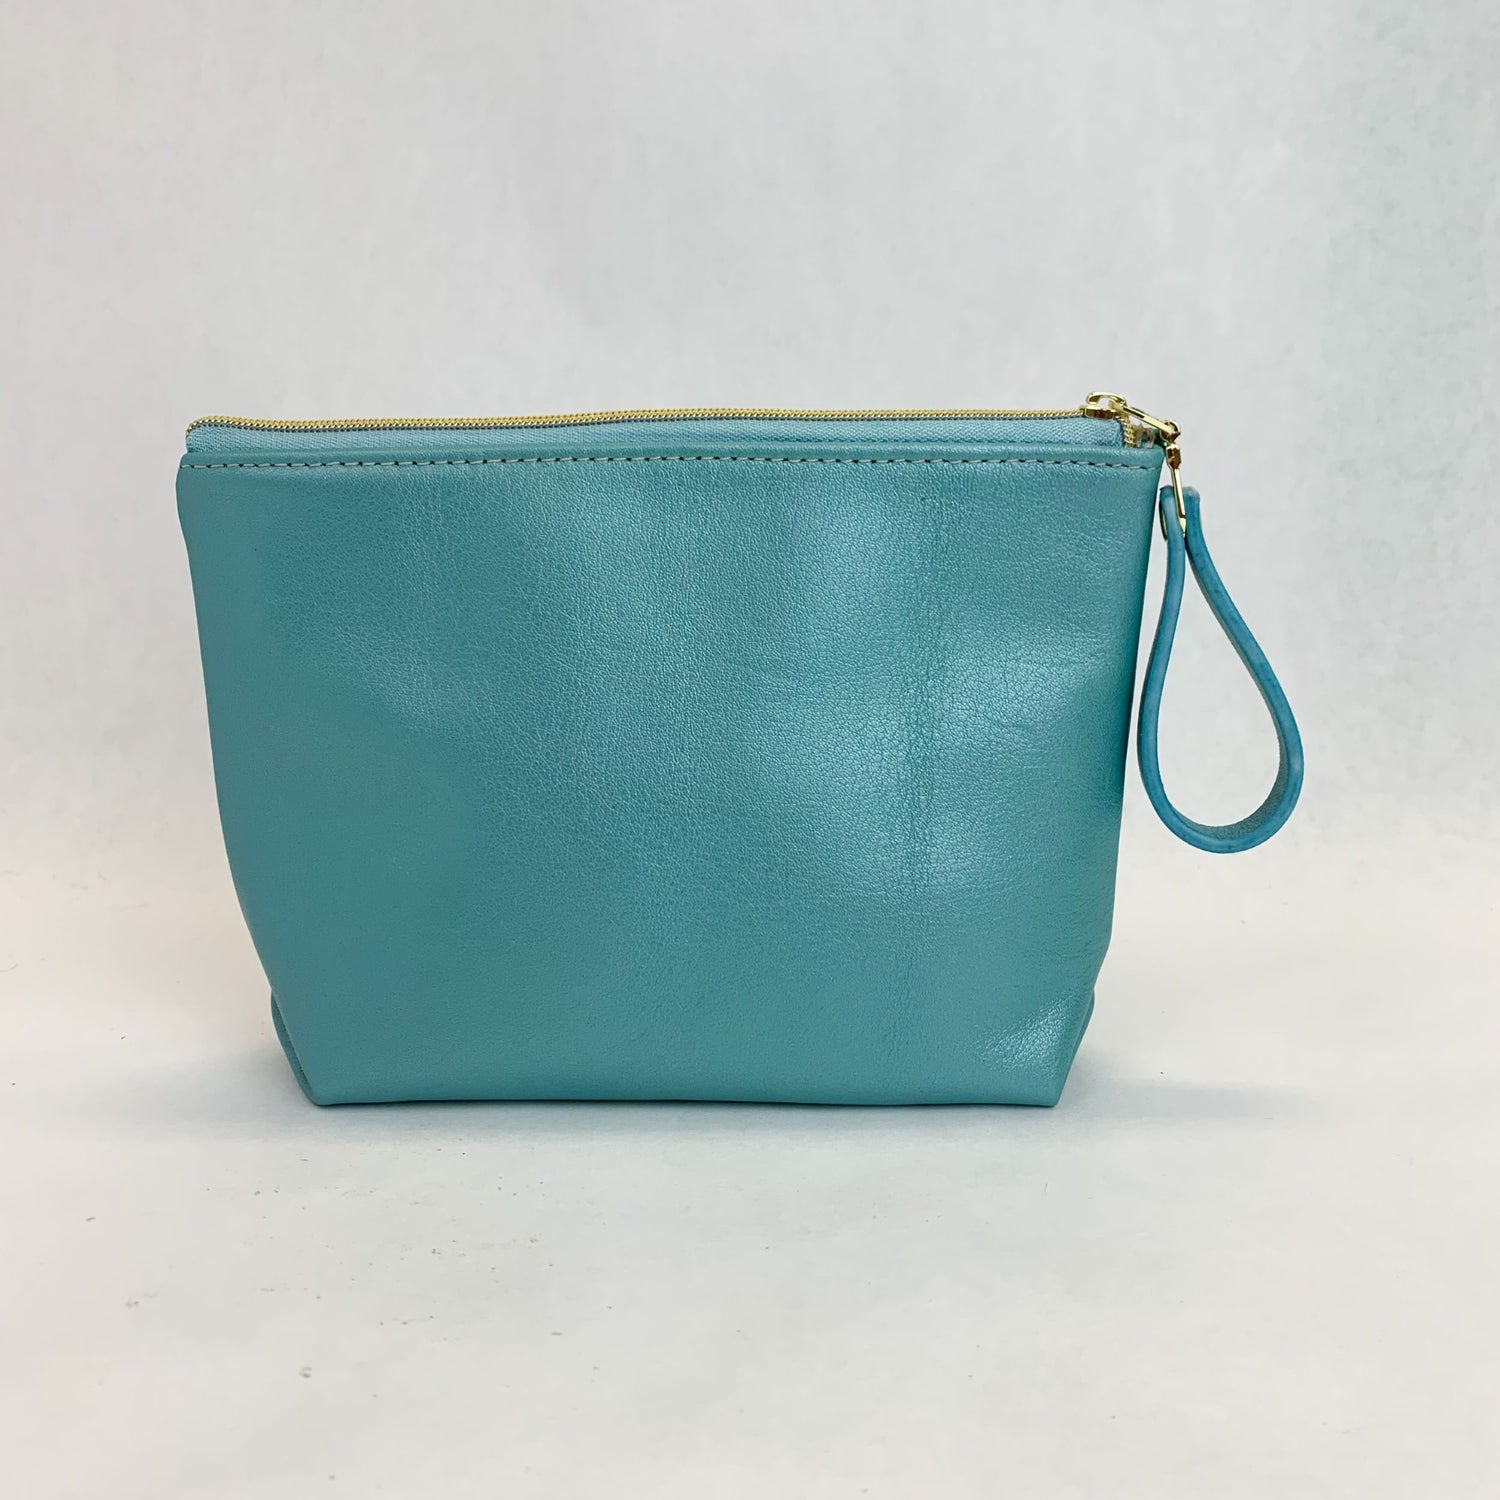 Back view T5 Cosmetics case toiletry bag designer handcrafted in smooth calf leather in turquoise.